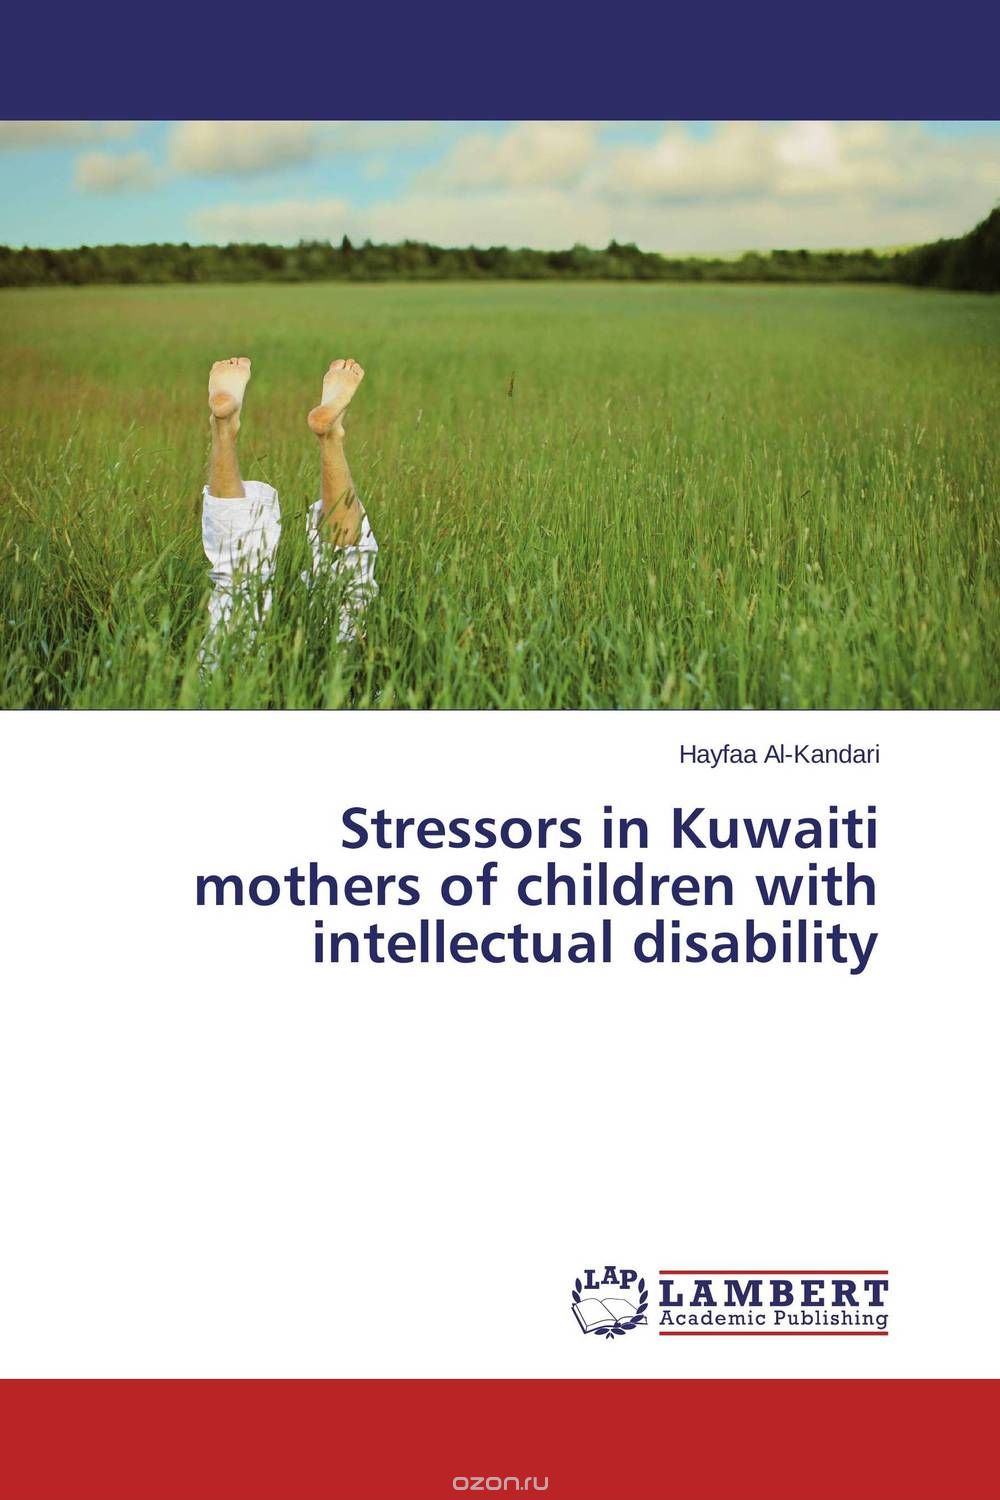 Stressors in Kuwaiti mothers of children with intellectual disability